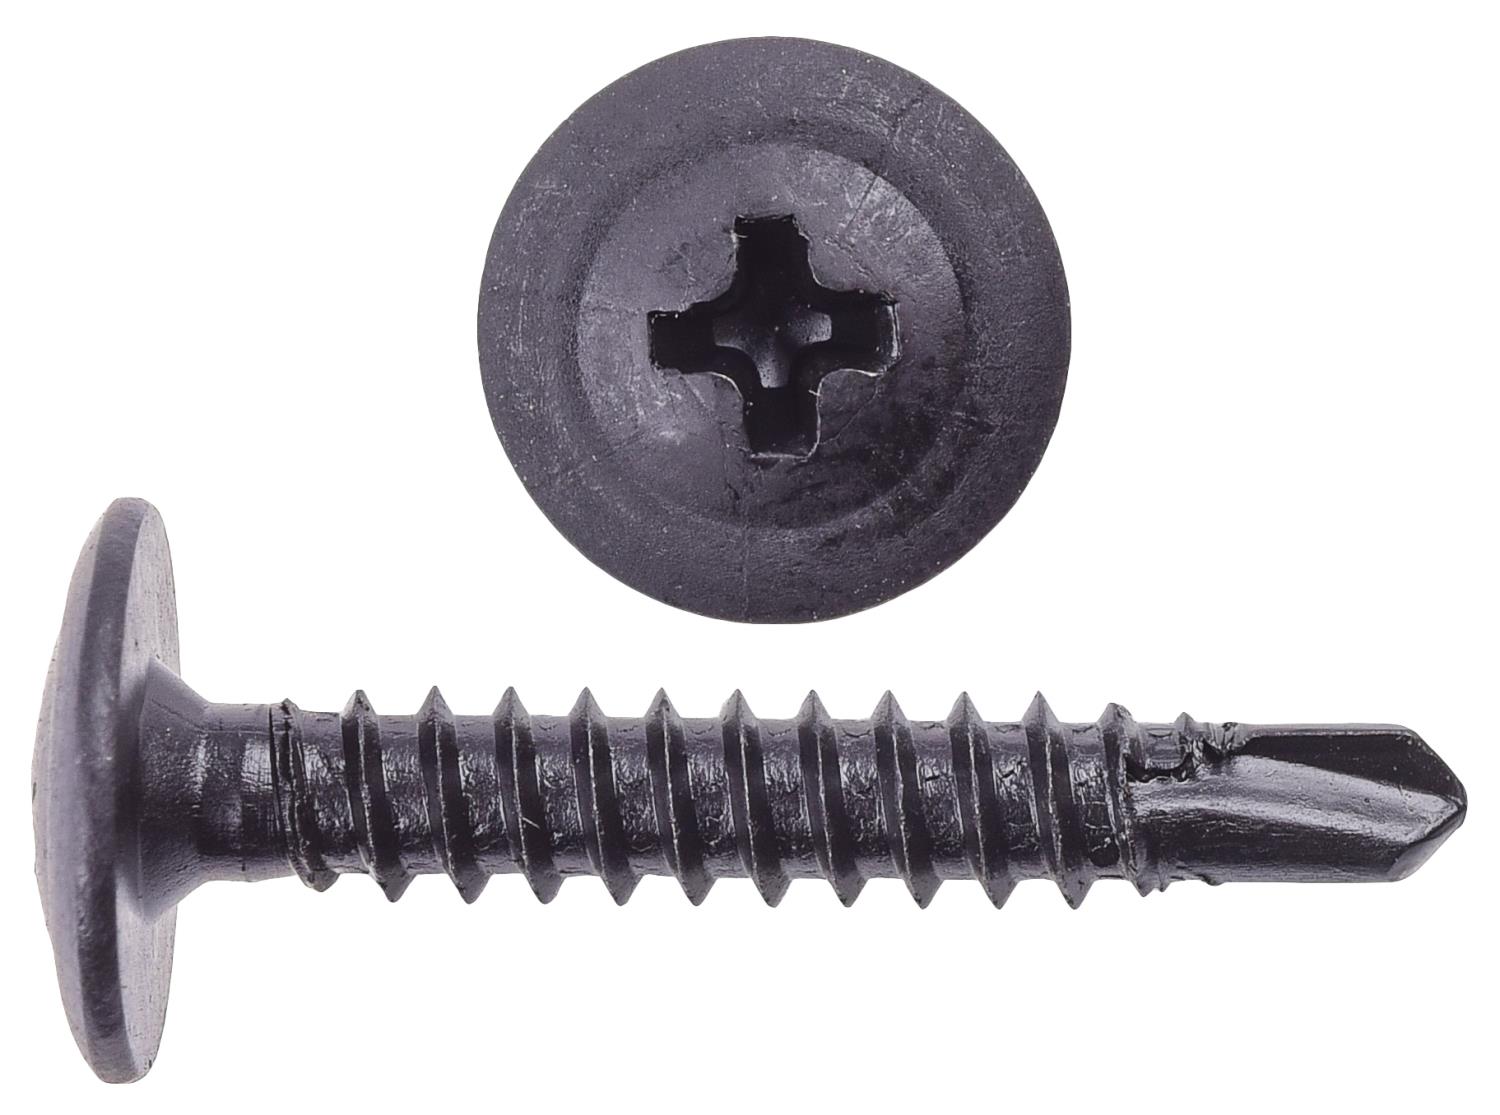 Phillips Oval Washer Head Trim Screws #8 x 1 in. UHL [Self-Tapping, 50 Pieces]